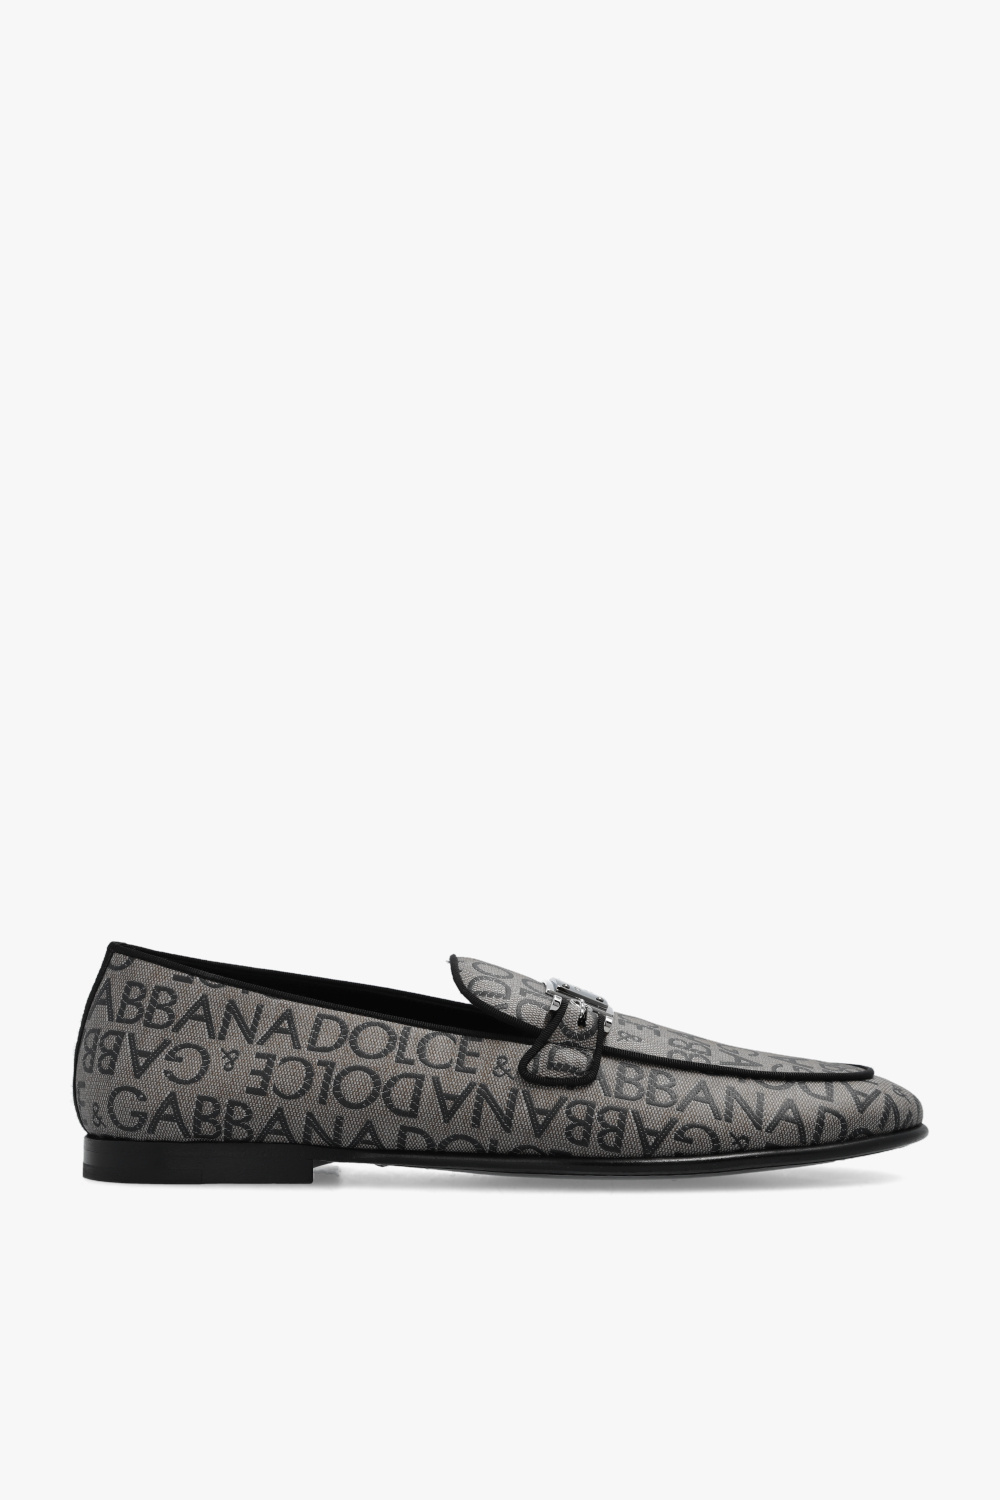 Dolce & Gabbana Loafers with monogram